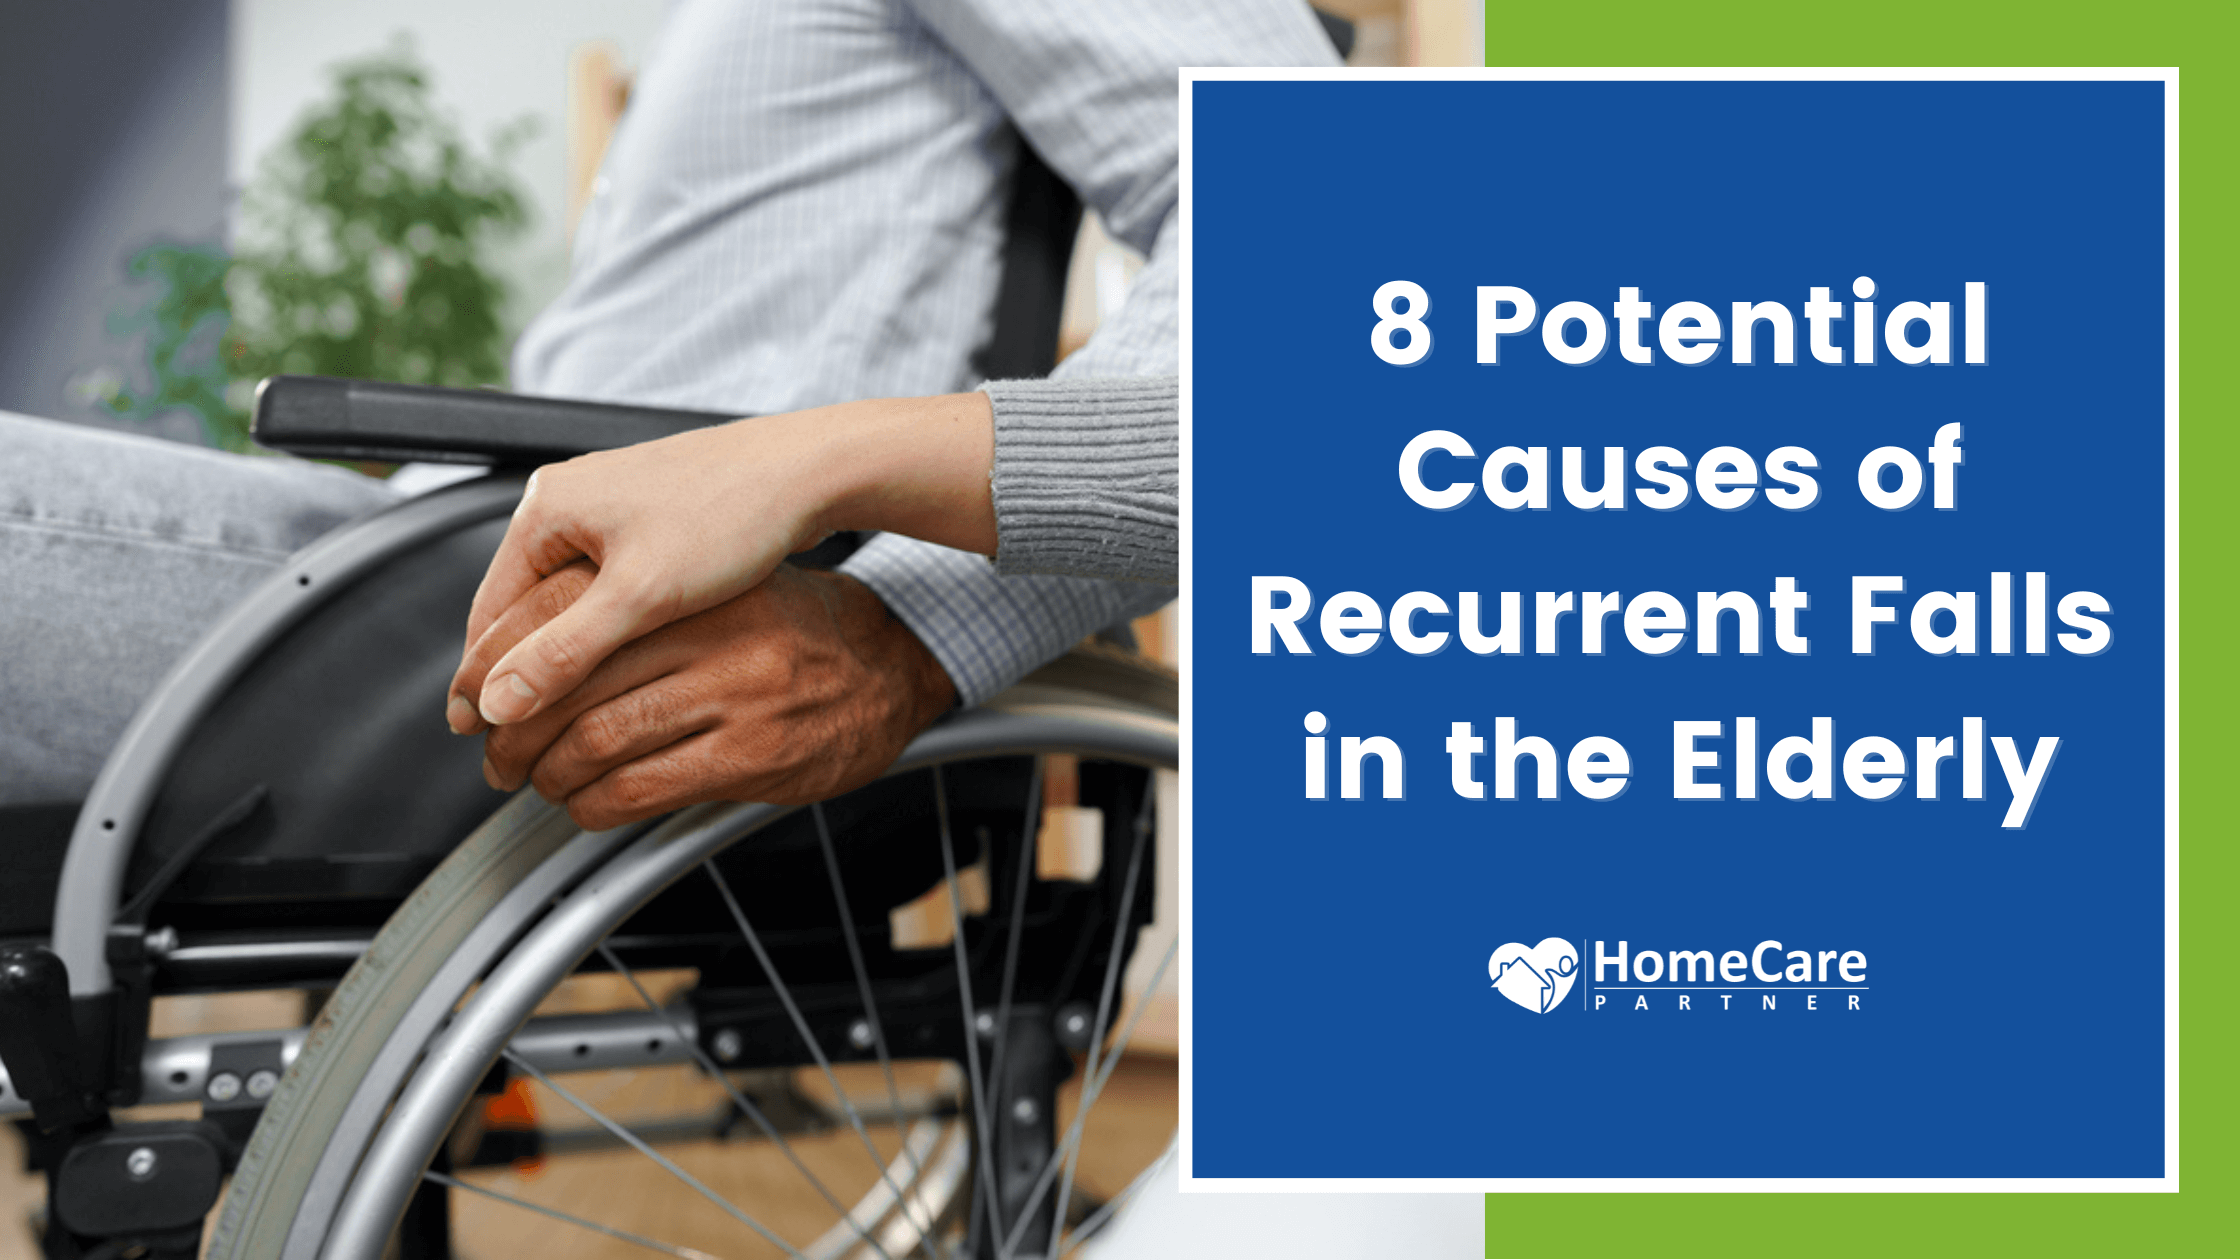 8 Potential Causes of Recurrent Falls in the Elderly